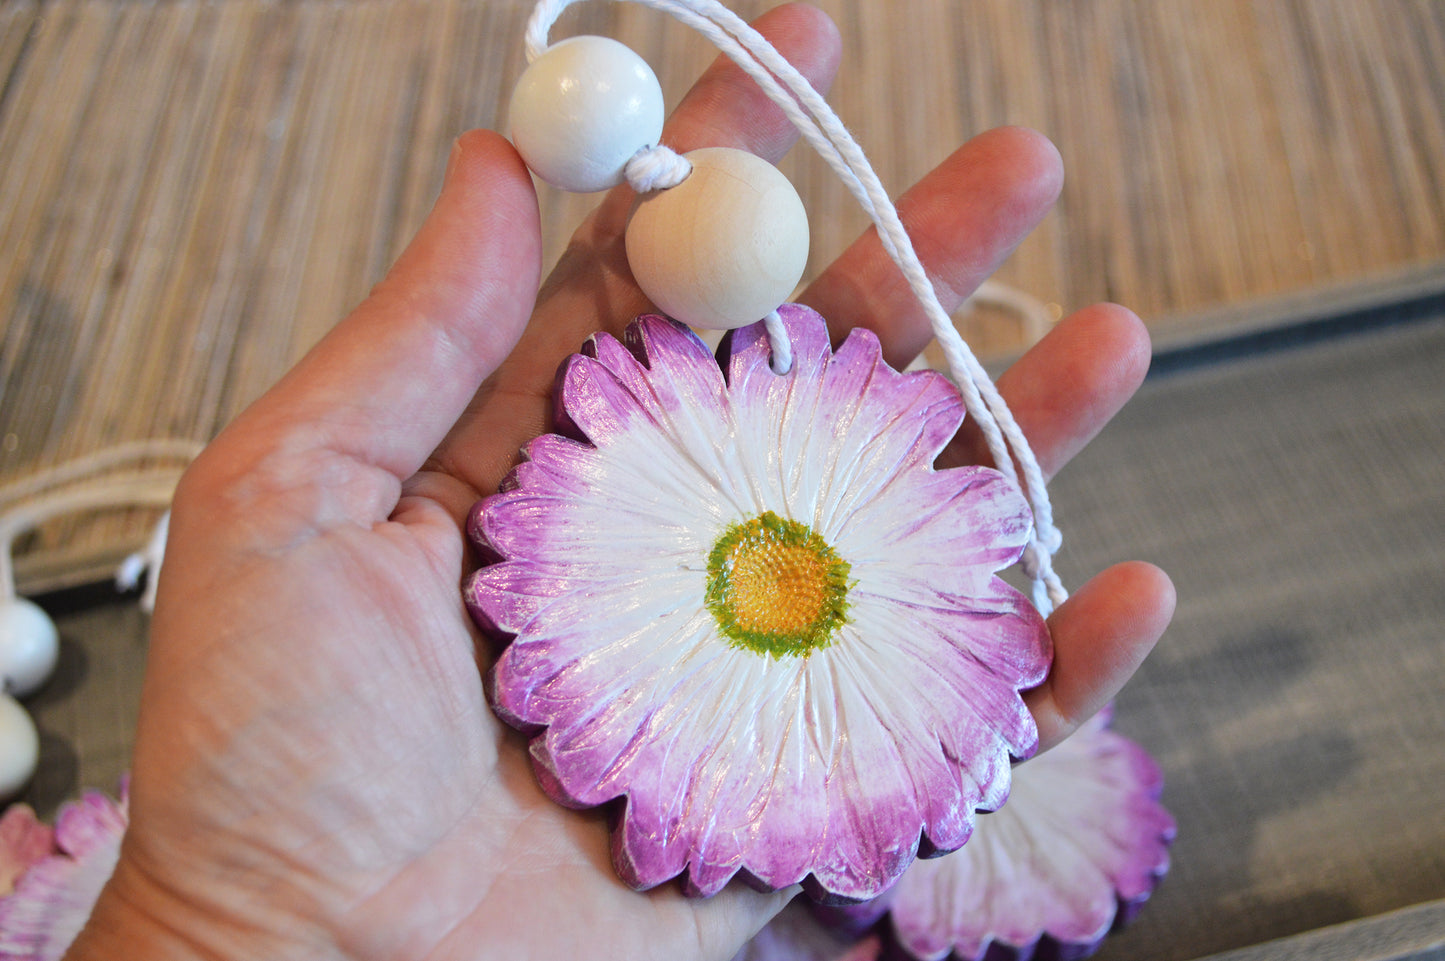 Essential oil diffuser daisy flower car charm ornament / Make your ride smell awesome